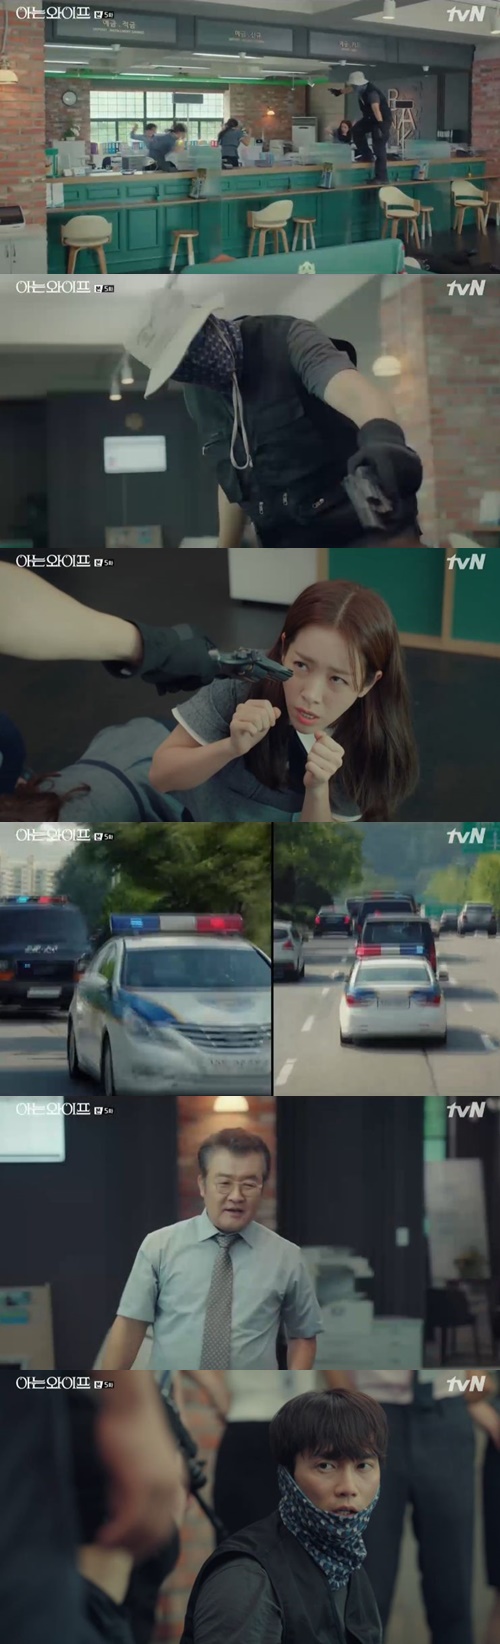 Han Ji-min, a knowing wife, showed his base in training.In the TVN drama Knowing Wife, which aired on the afternoon of the 15th, World Bank employees were shown being trained to simulate a window accident.I want to go to the restaurant, said Seo Woo Jin (Han Ji-min).I can not do it because of stressful bladder infection. After the training, the evaluation time continued. The manager told Seo Woo Jin, who was a reporting and observation team, I did not observe but stimulated the intensity of the gun.If youre upset, youre going to have a gunshot wound to your body?Ill be careful, said Seo Woo Jin, but I have a question: Are you saying Belle is Noor after the robbery?The manager then taught, The first and second things that matter in real situations are safety.